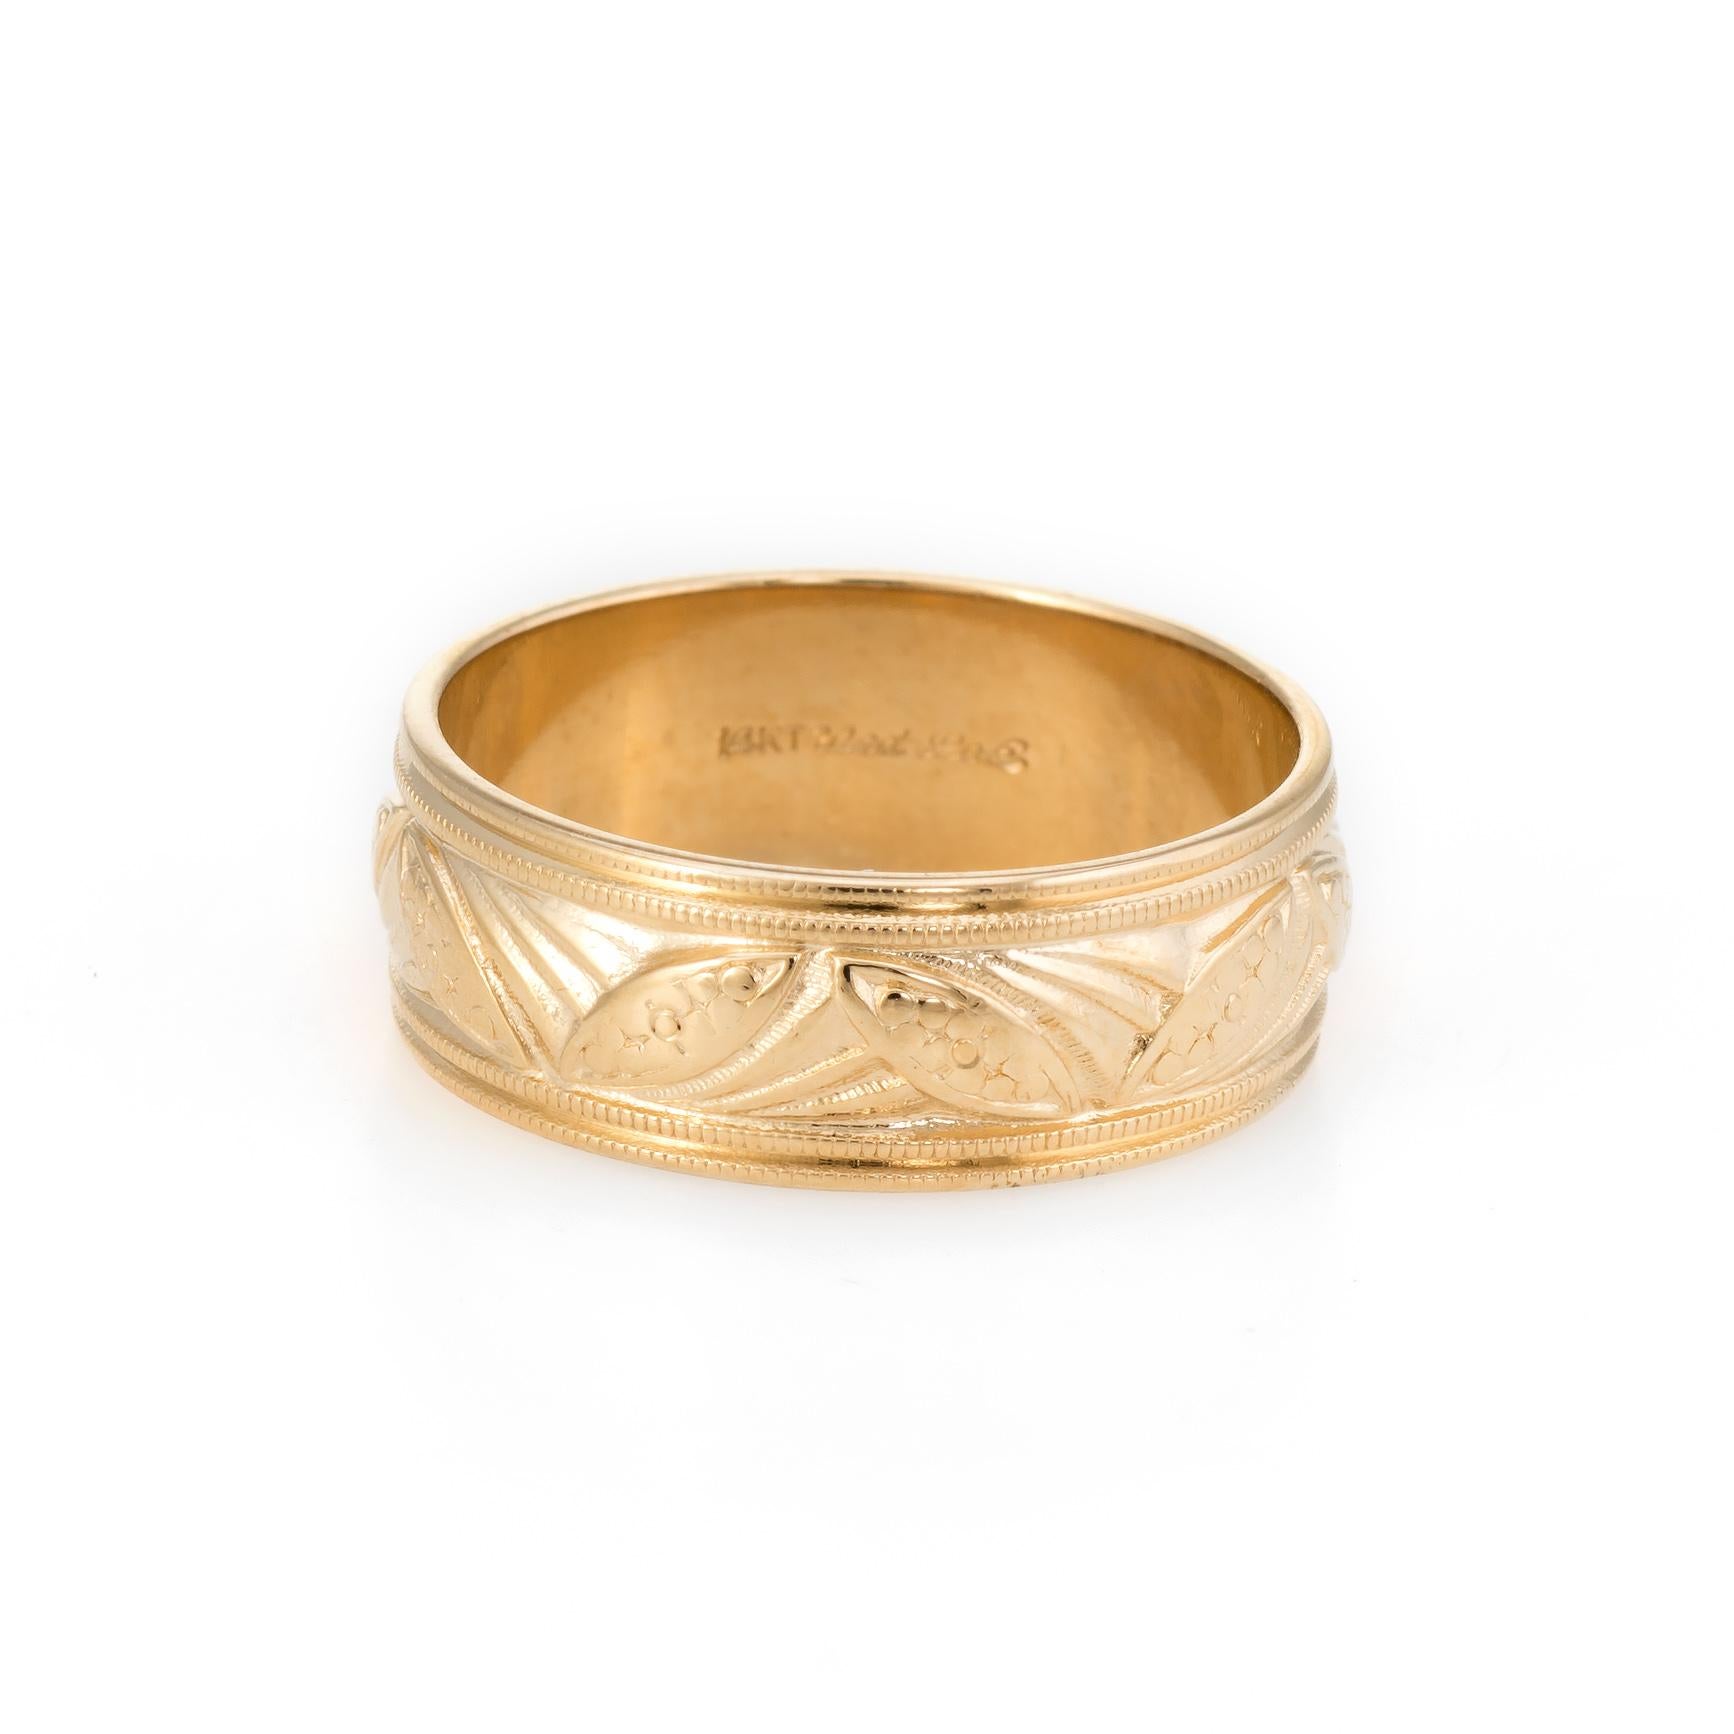 Elegant vintage wedding band, crafted in 14 karat yellow gold. 

The band features fine mille grain and navette embossed detail that is continuous around the band.   

The ring is in excellent condition. 

Particulars:

Weight: 4.1 grams

Stones: 